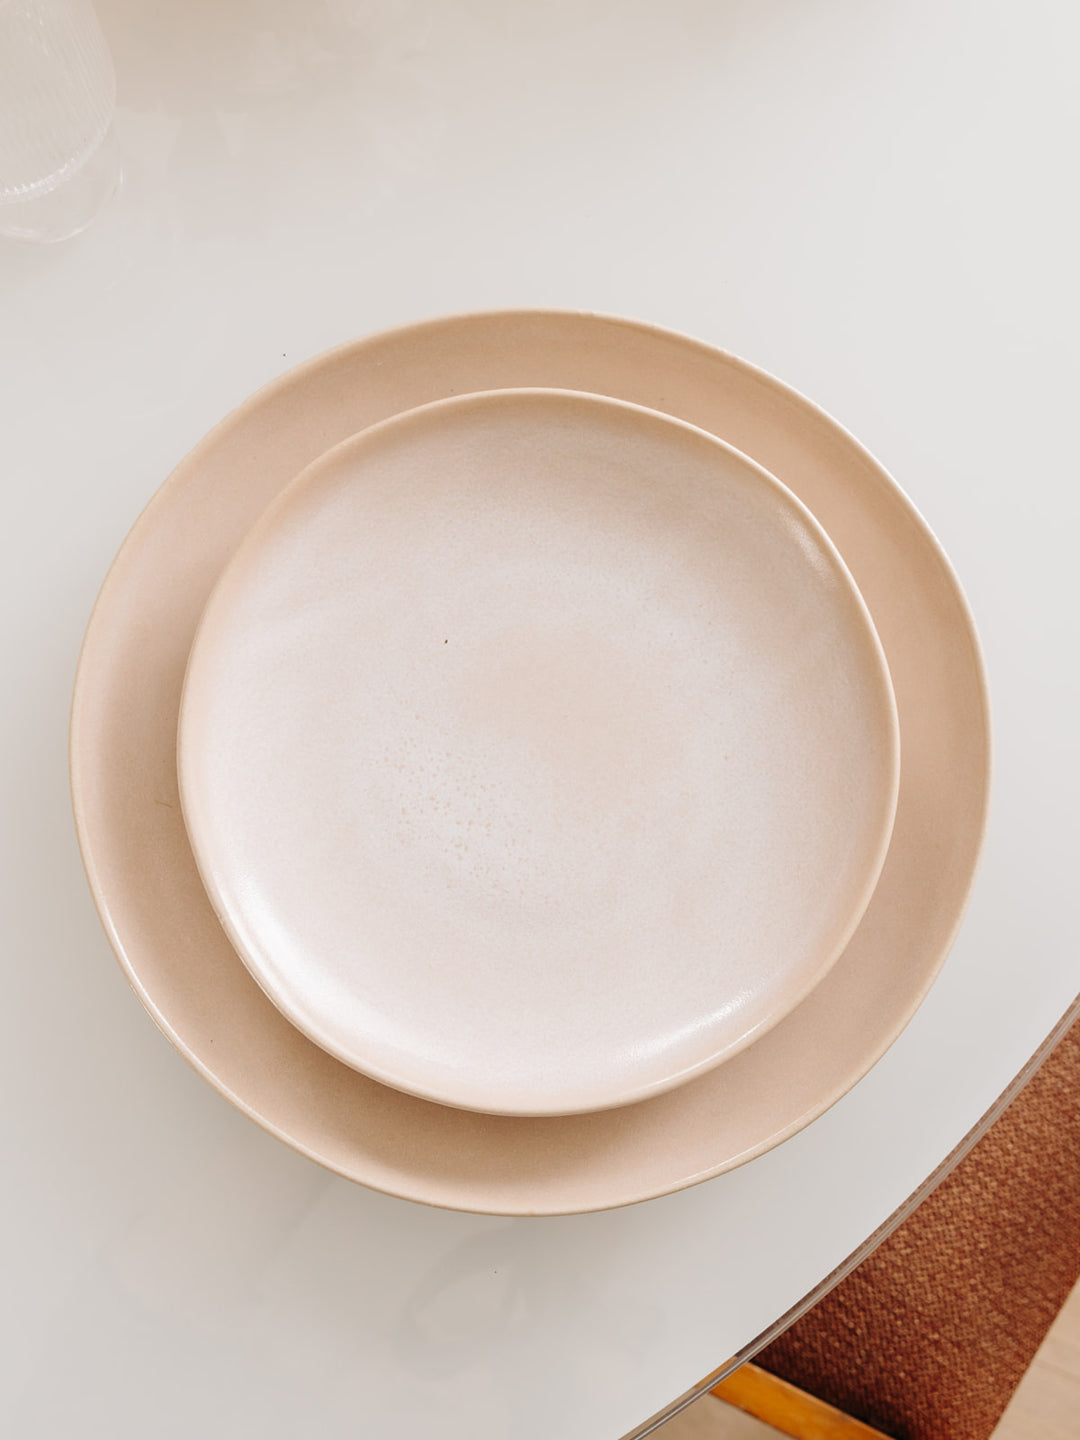 Bianca, the pink stoneware plate